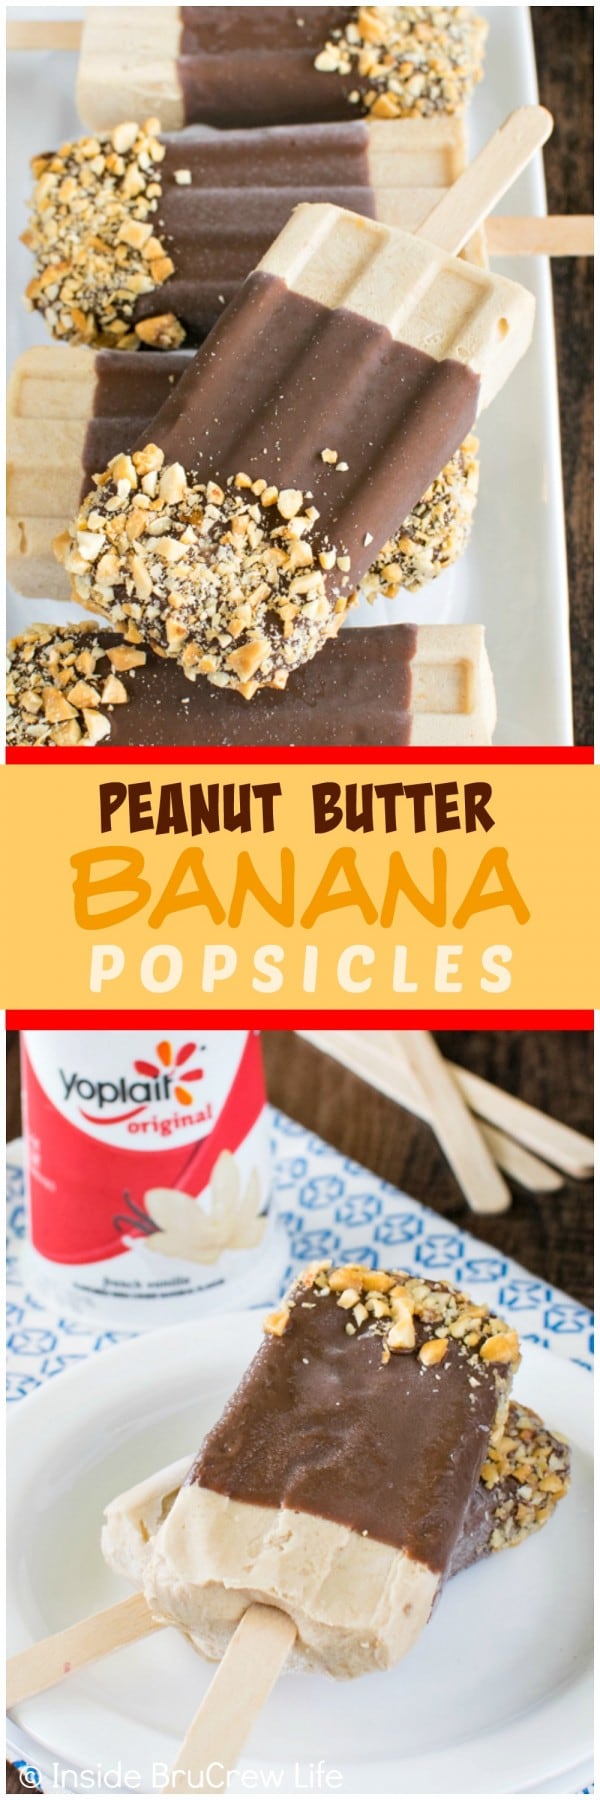 Peanut Butter Banana Popsicles - these easy treats are loaded with yogurt, peanut butter, and banana. Delicious after school snack or dessert recipe!